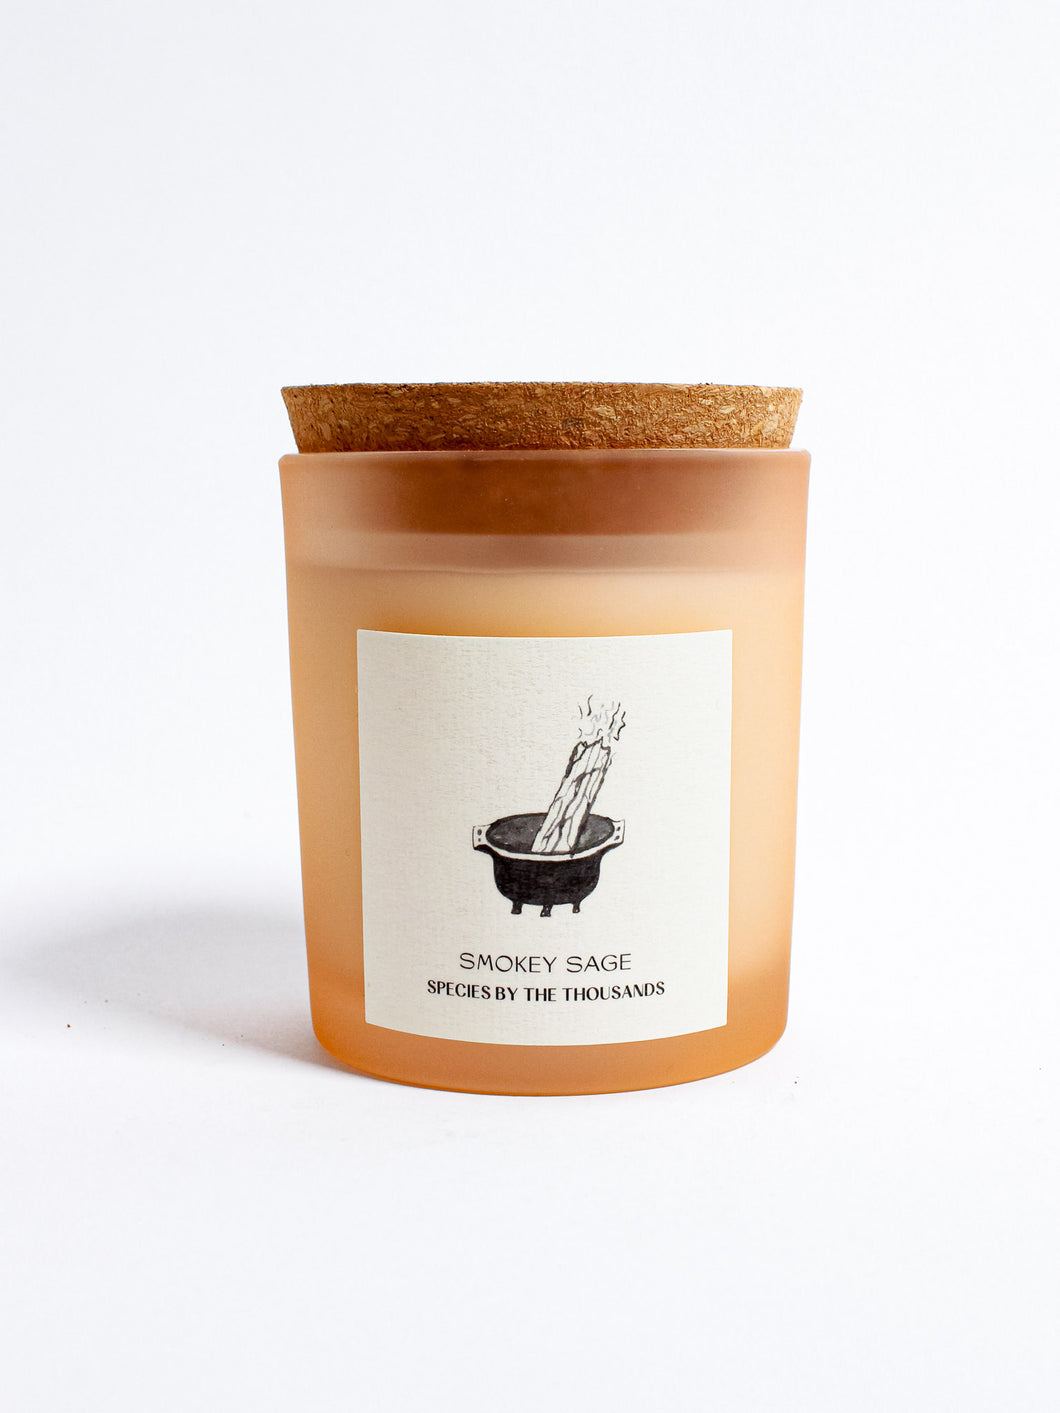 Smokey Sage Soy Candle - Species by the Thousands - Berte